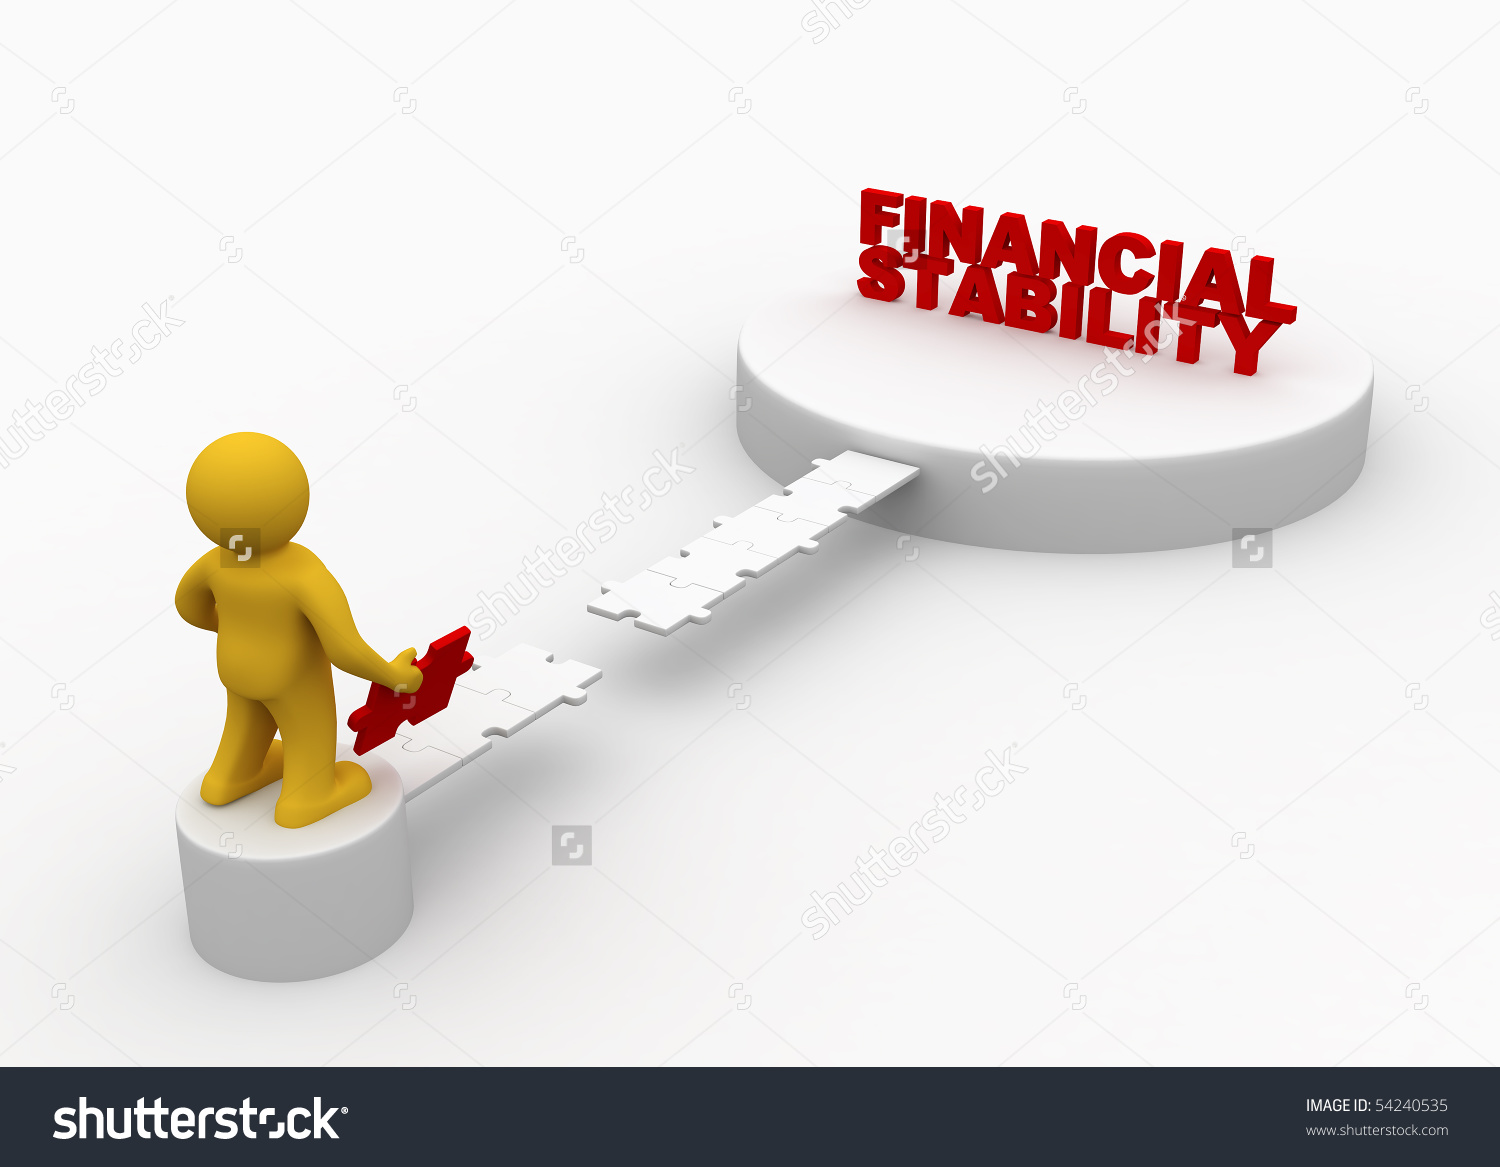 financial clipart financial stability